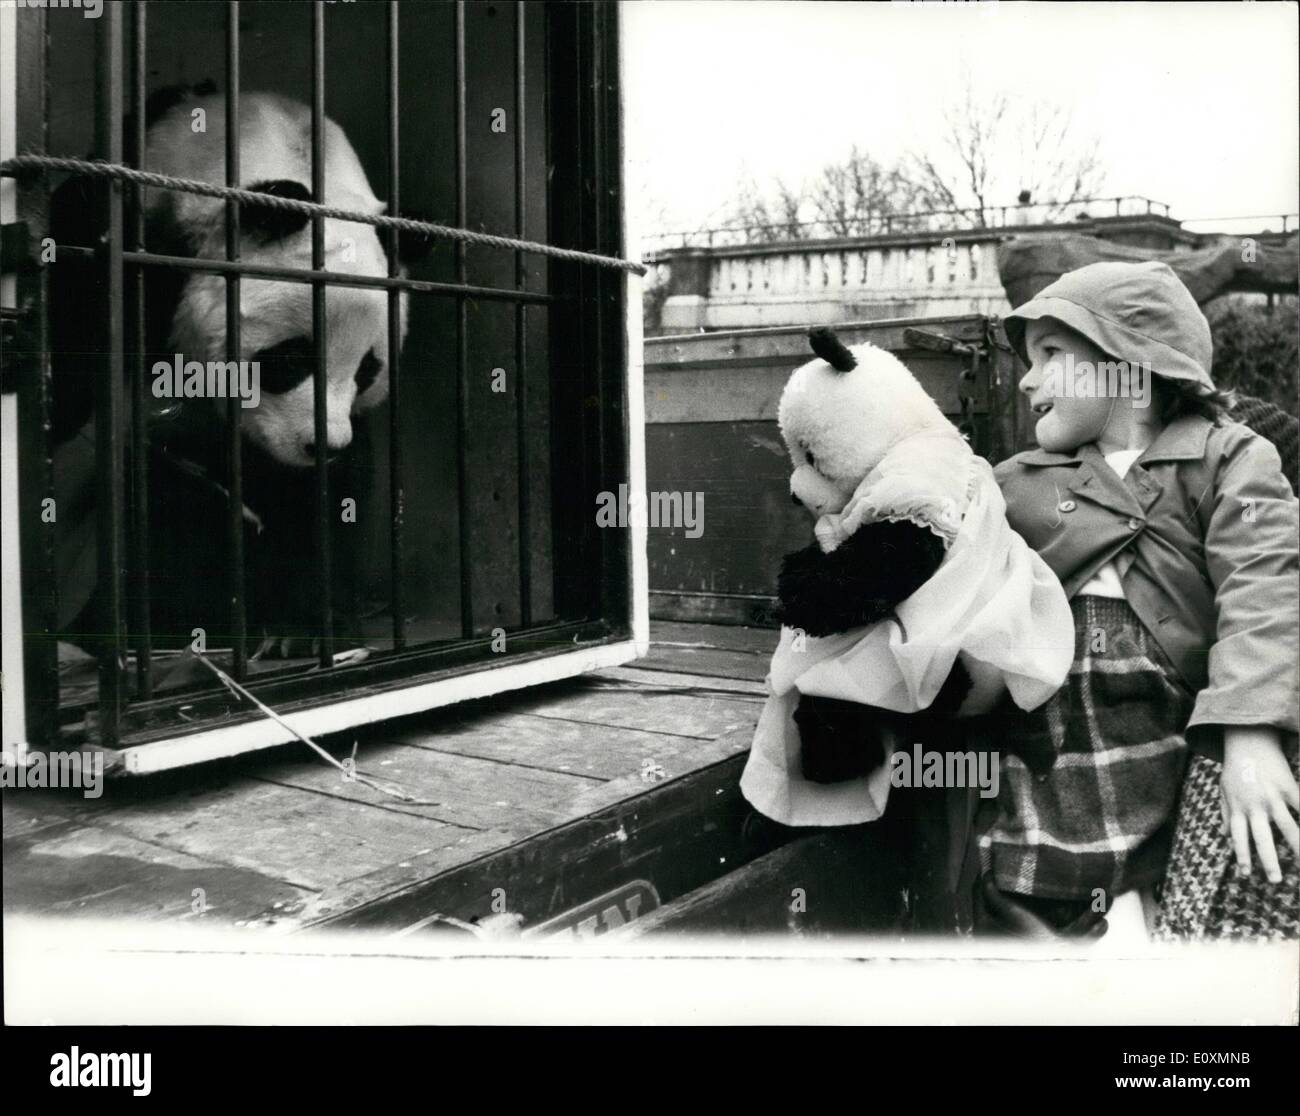 Apr. 04, 1967 - ''Chi-Chi'' On The Move Again: ''Chi-Chi'', this month traveled Panda, is an move again. Today she moved from her Old quarters near the Clock Tower at the London Zoo to a new and larger enclosure opposite too the Children's Zoo. Her accommodation includes air-conditioning and behind scenes accommodation on has been provided for a second Giant Panda, in the hope that ''An-An'', the Russian male Panda might still possibly visit London in the Autumn. Head keeper Sam Morton, who want to Moscow, will still he looking after ''Chi-Chi'' in her new quarters Stock Photo